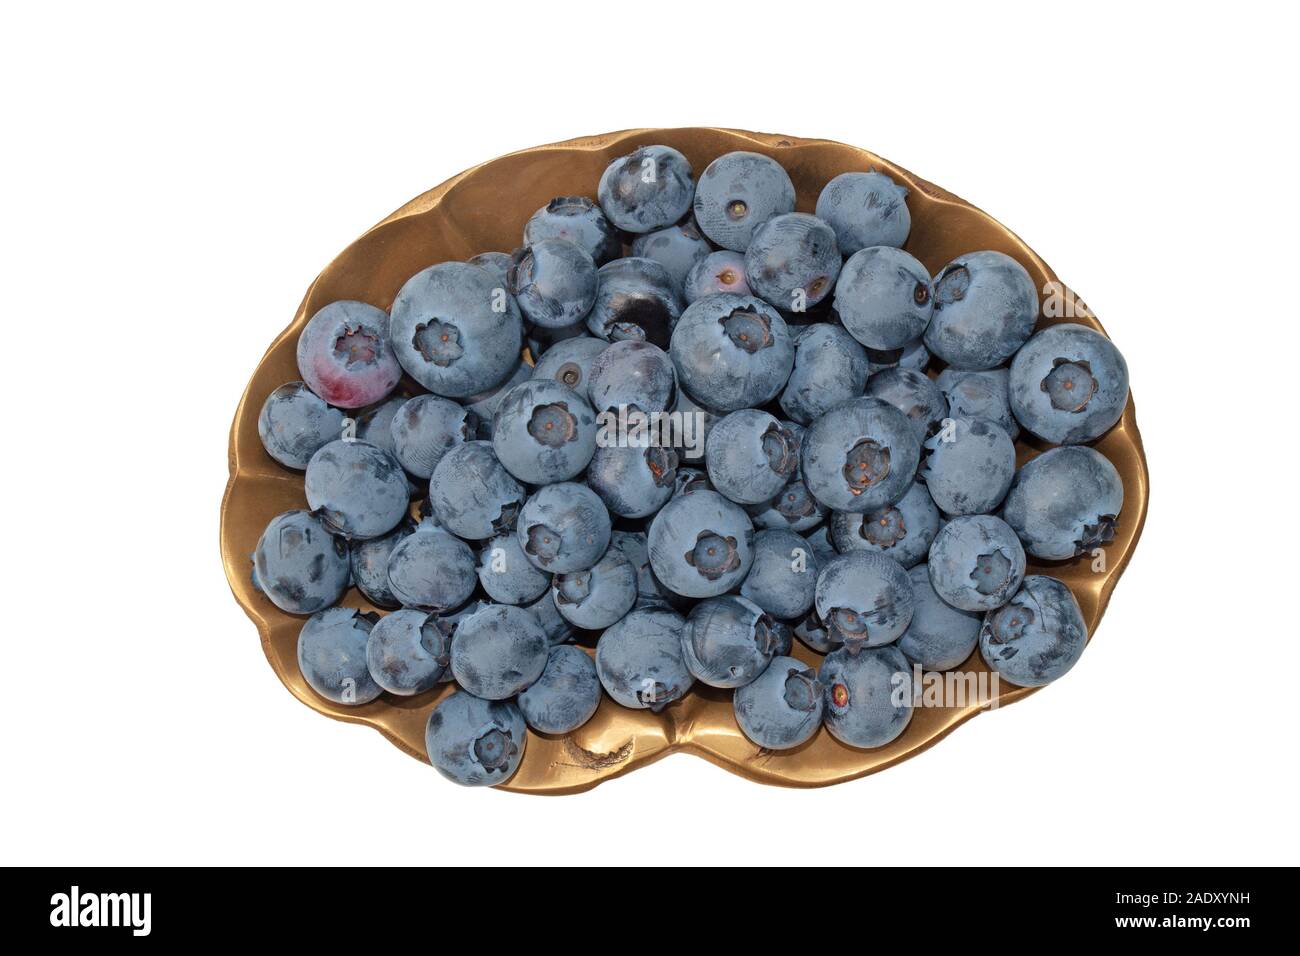 Blueberries in the bowl against white background Stock Photo